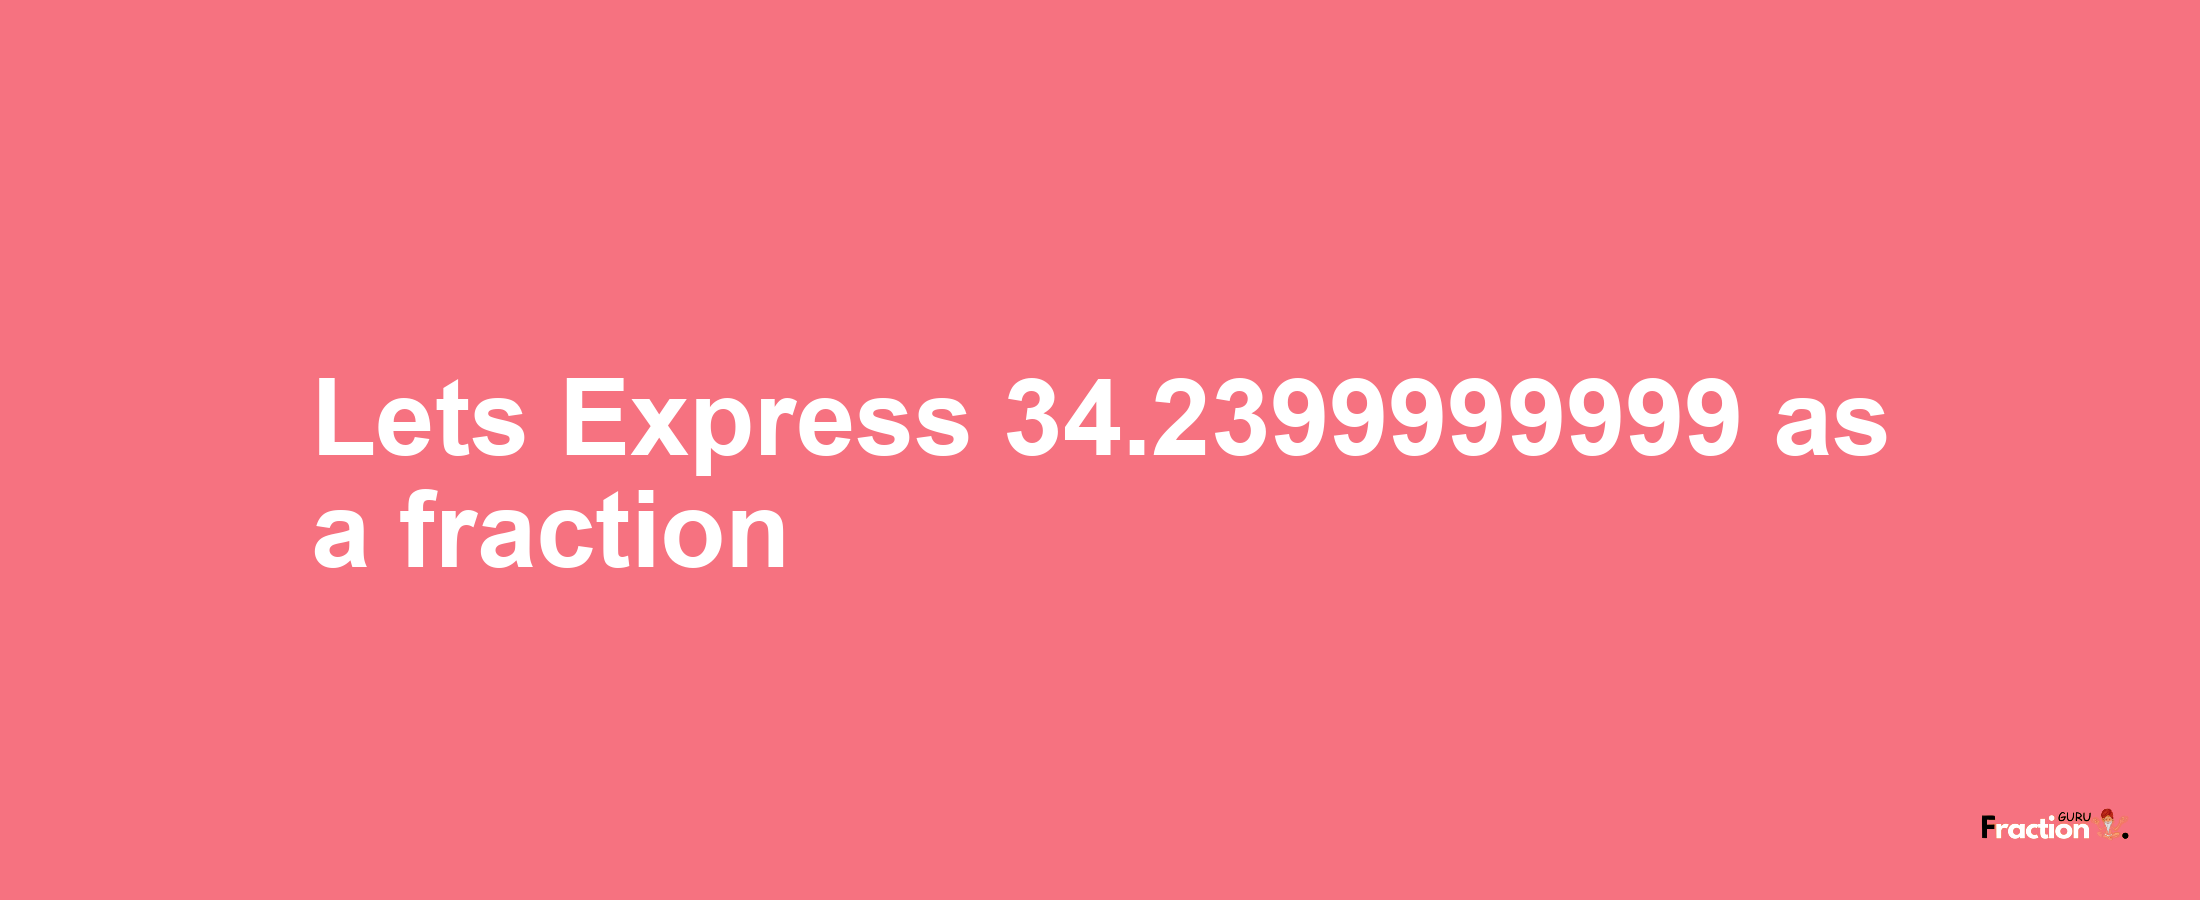 Lets Express 34.2399999999 as afraction